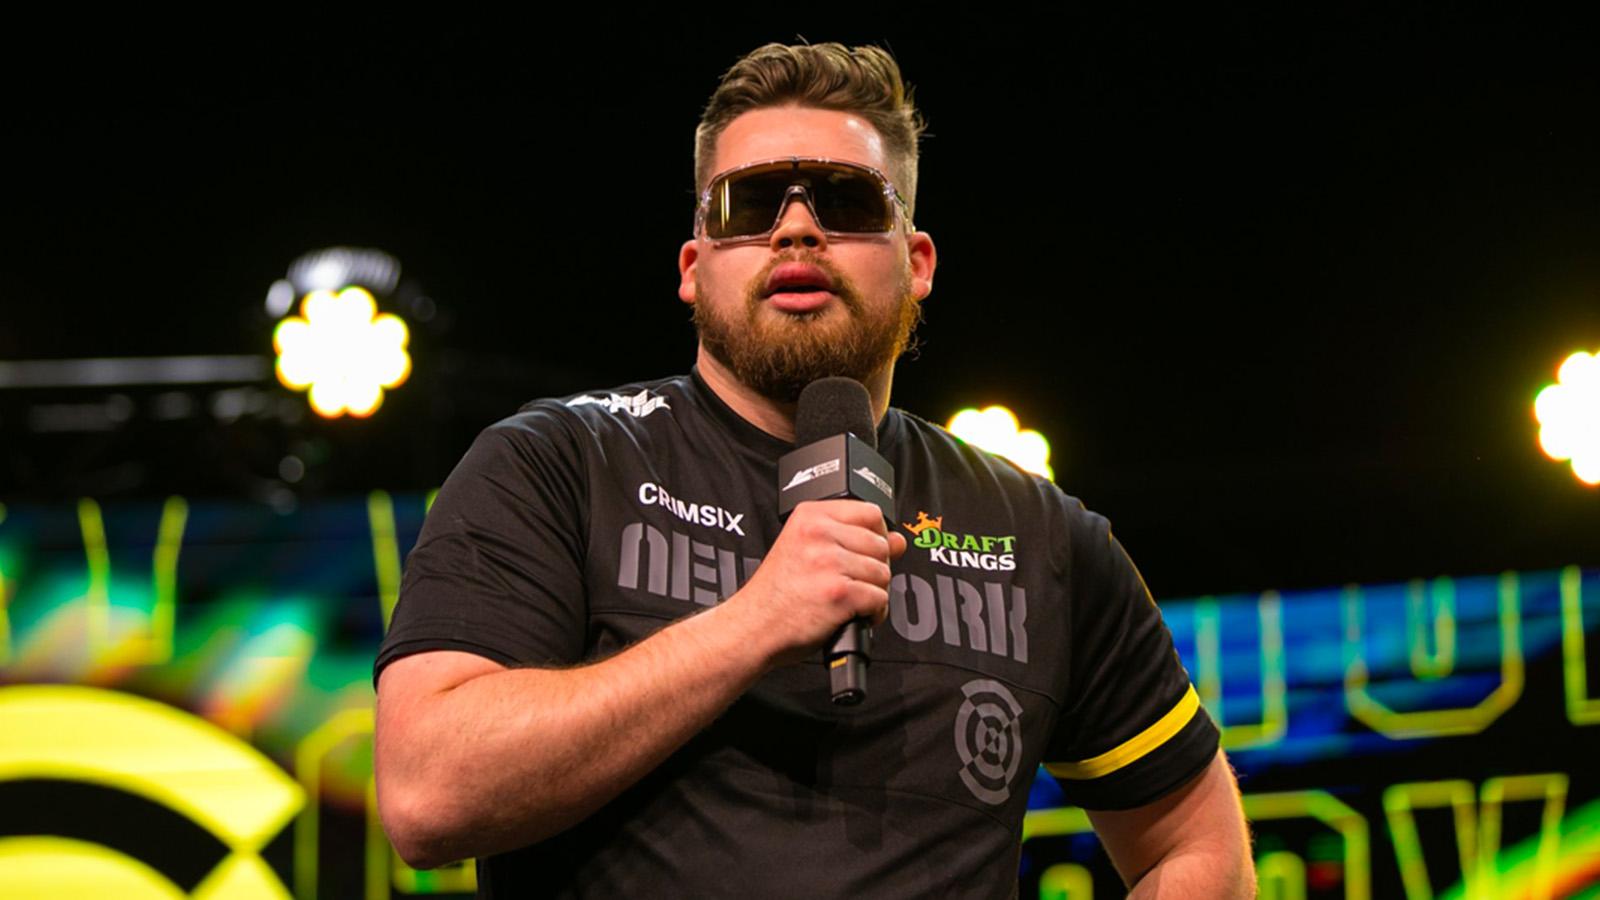 Crimsix speaks out on Call of Duty GOAT debate: “It's not that serious” -  Dexerto